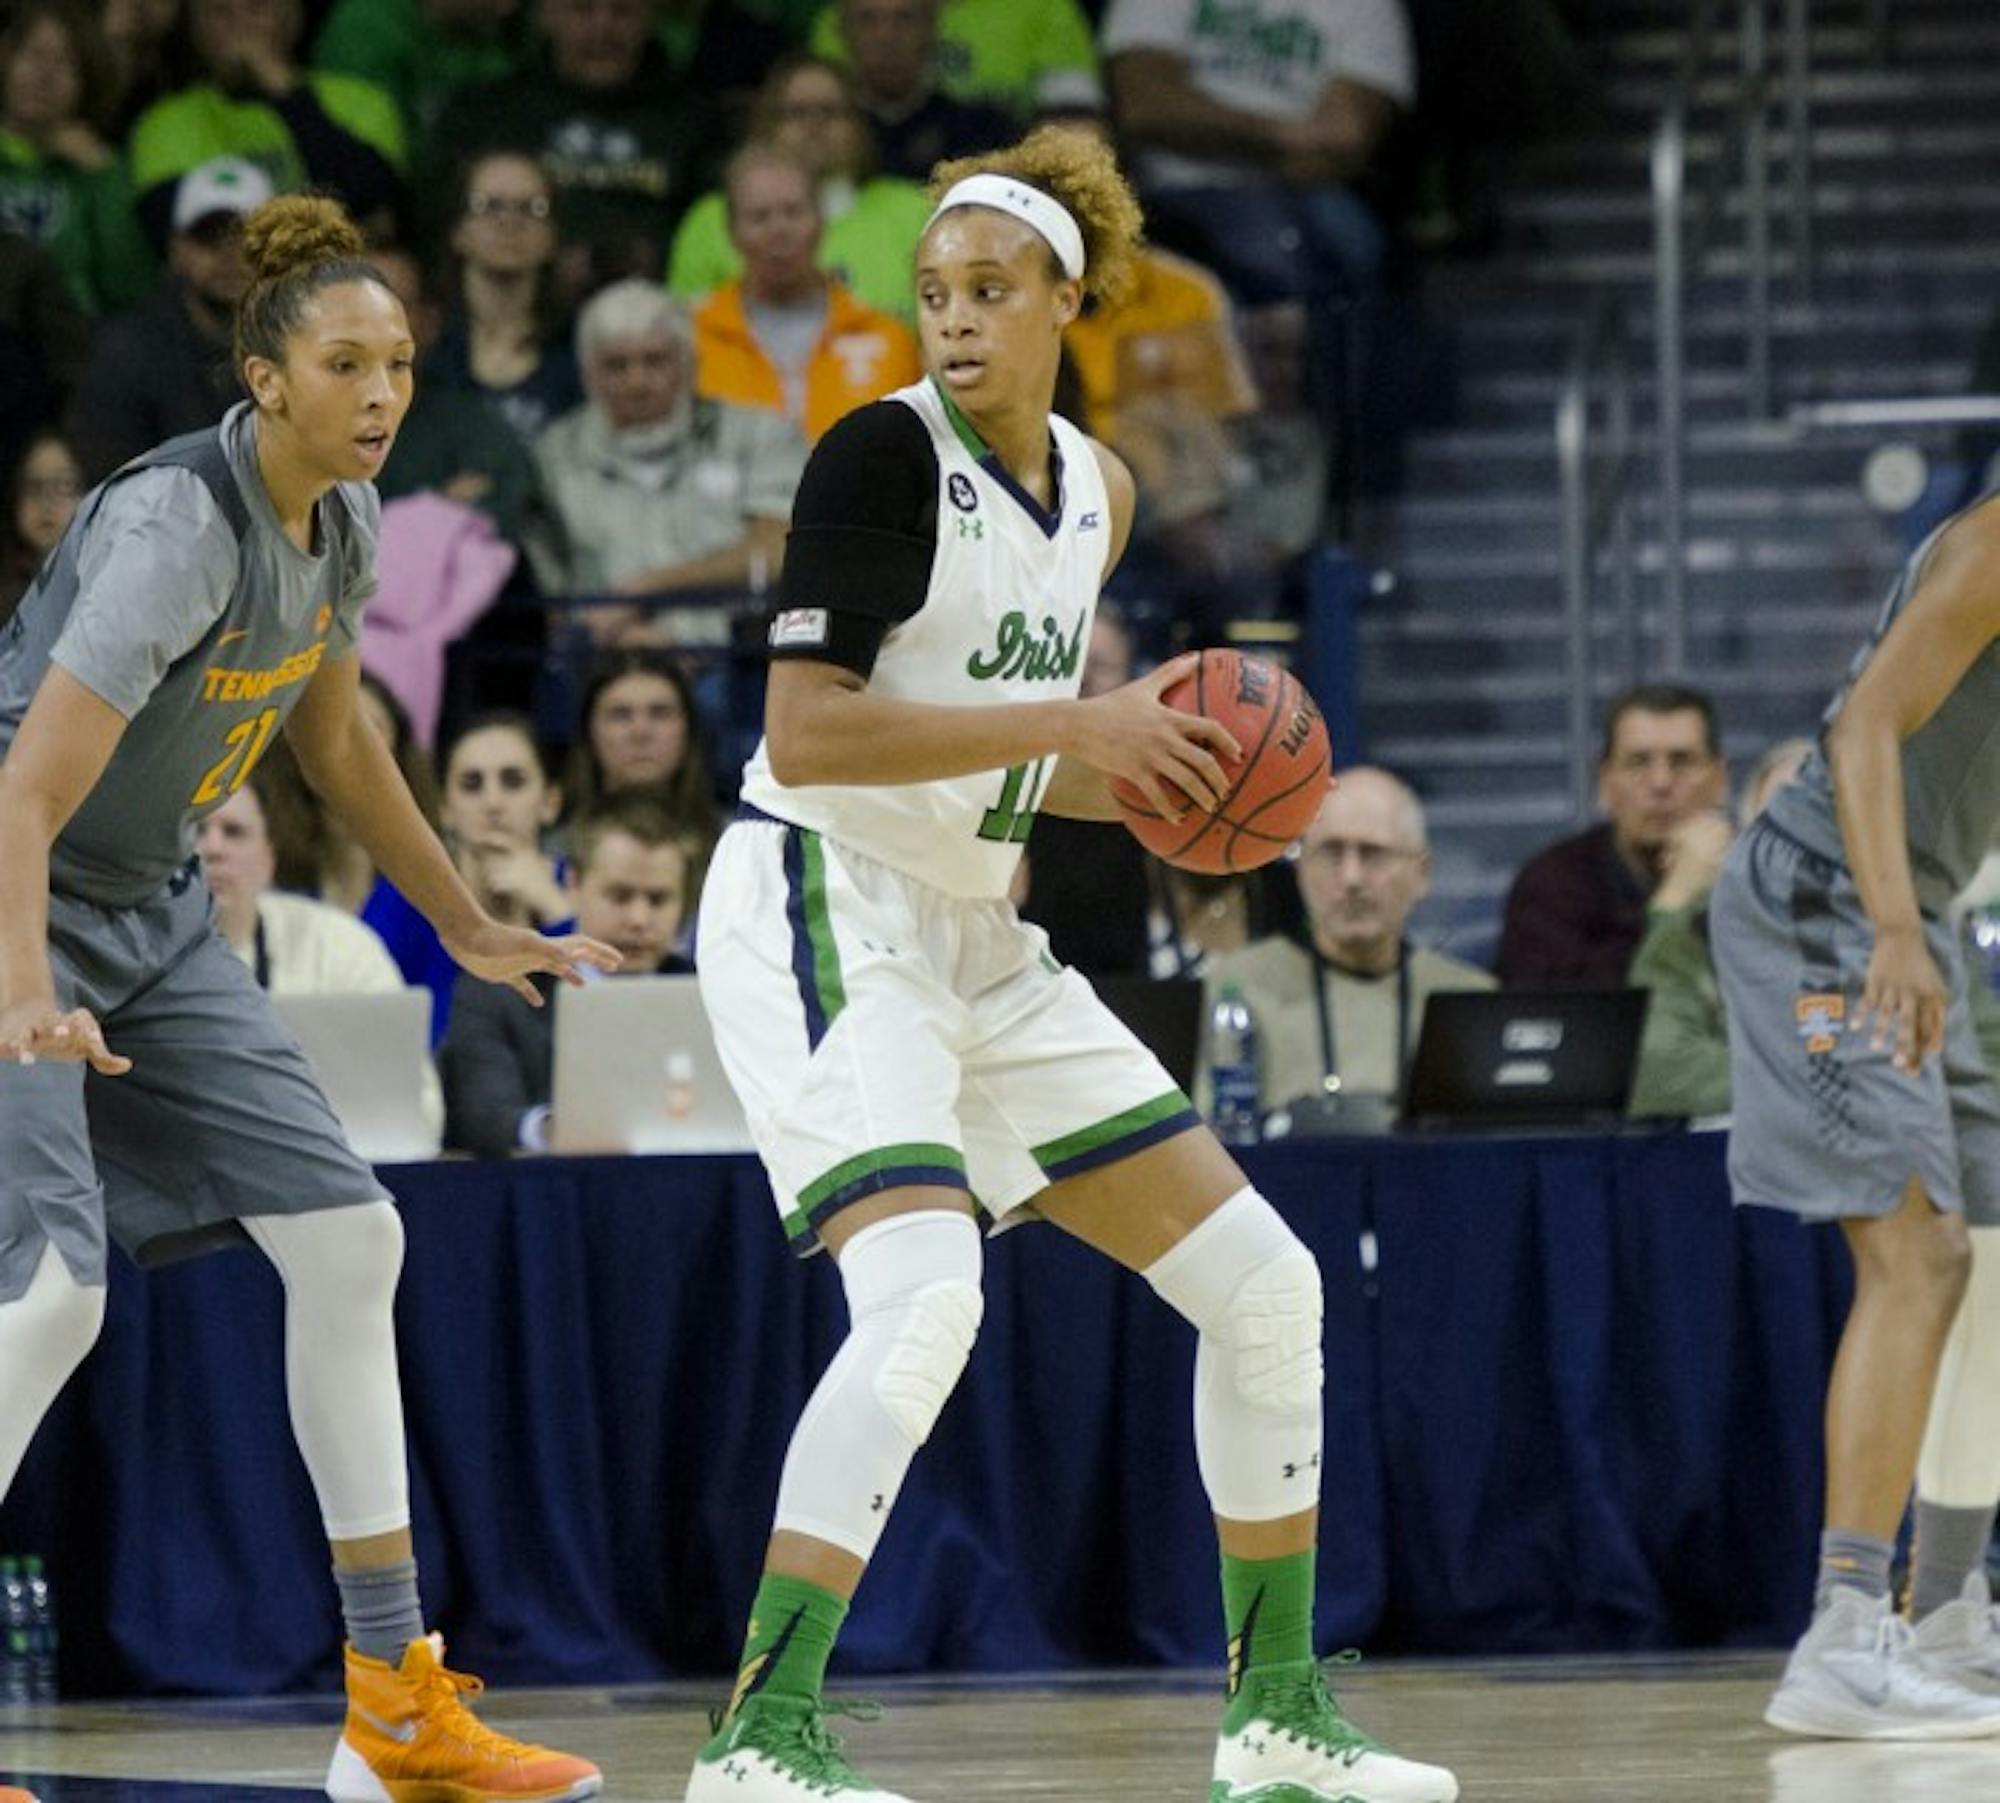 Irish sophomore forward Brianna Turner looks toward te basket during a 79-66 victory over Tennessee on Jan. 18 at Purcell Pavilion. Turner had 14 points, nine rebounds and 5 blocks in the game.